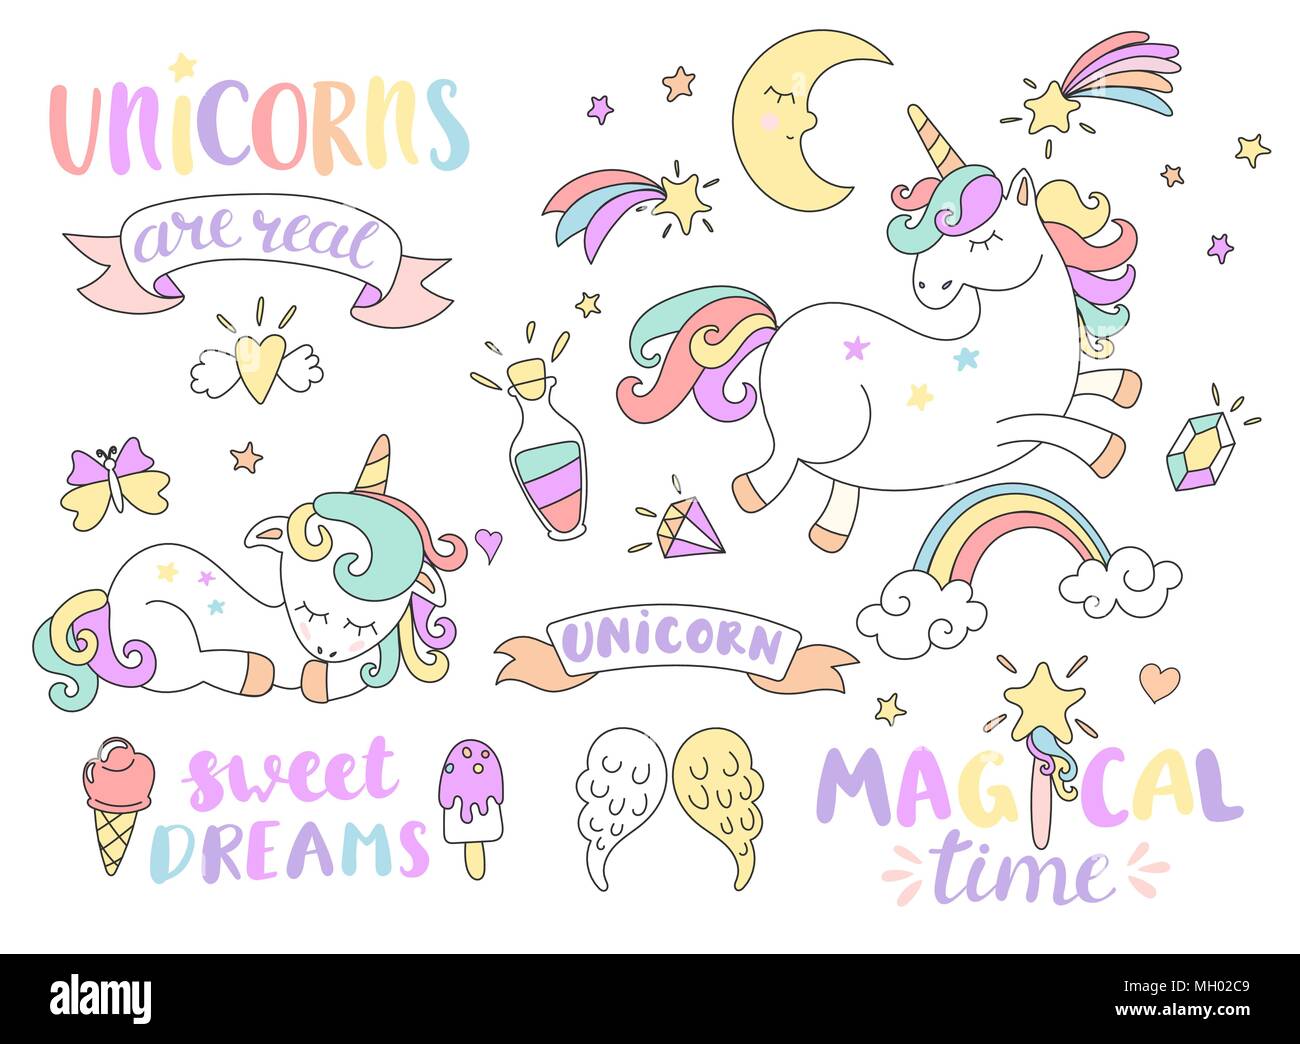 Set Of Unicorns And Different Fairy Tales Elements With Some Lettering